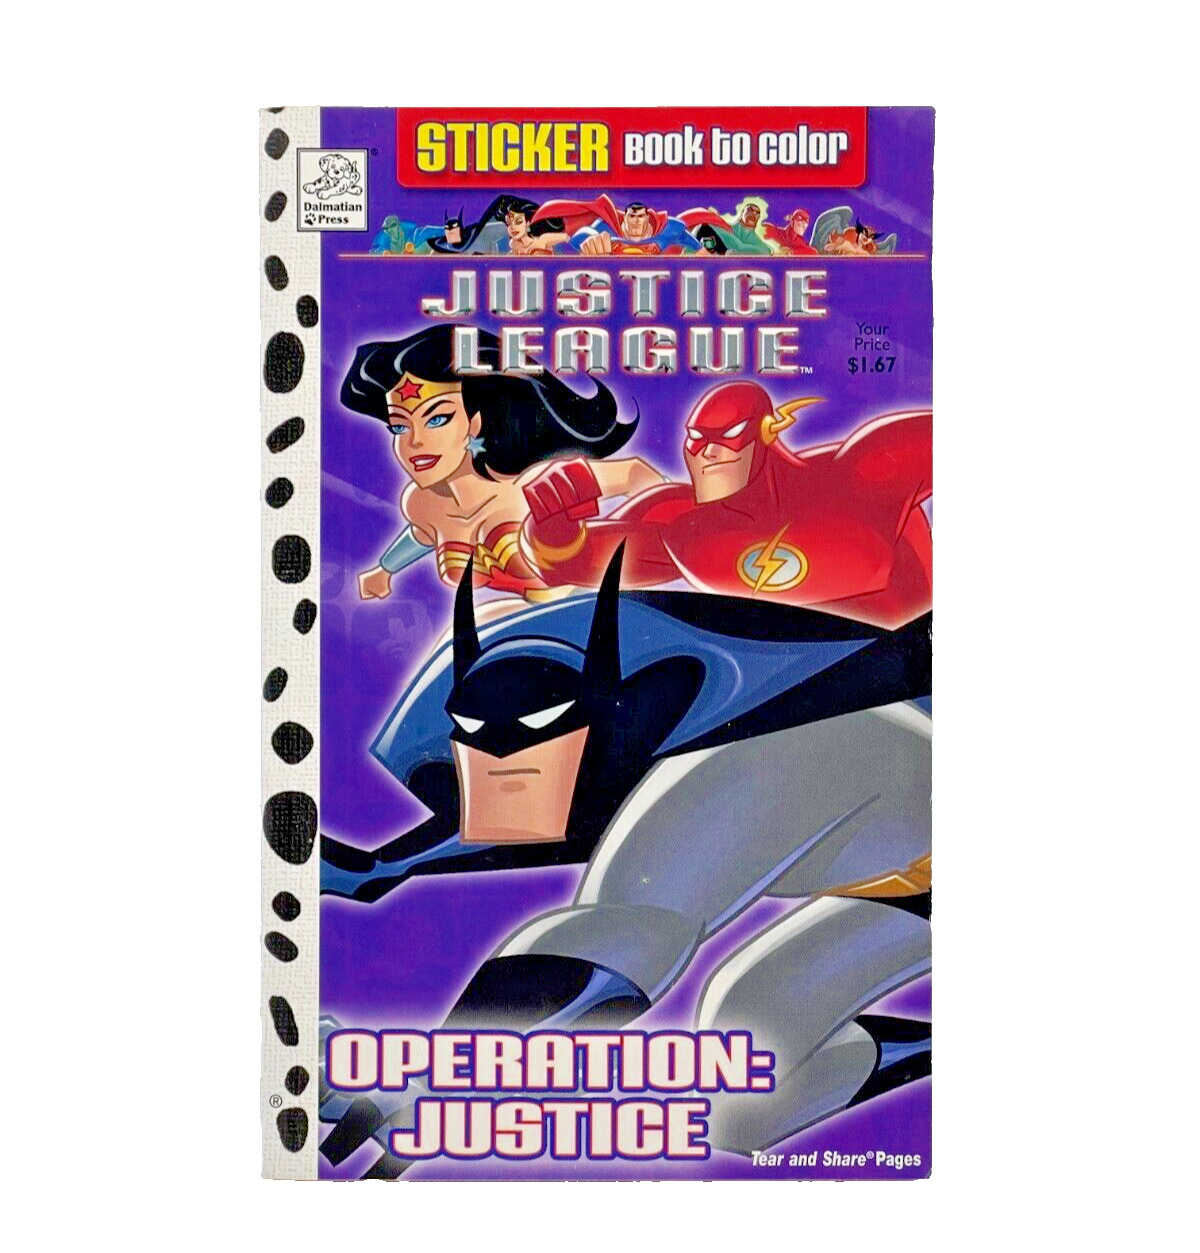 2004 Justice League Operation Justice Sticker Book to Color Unused DC-A4